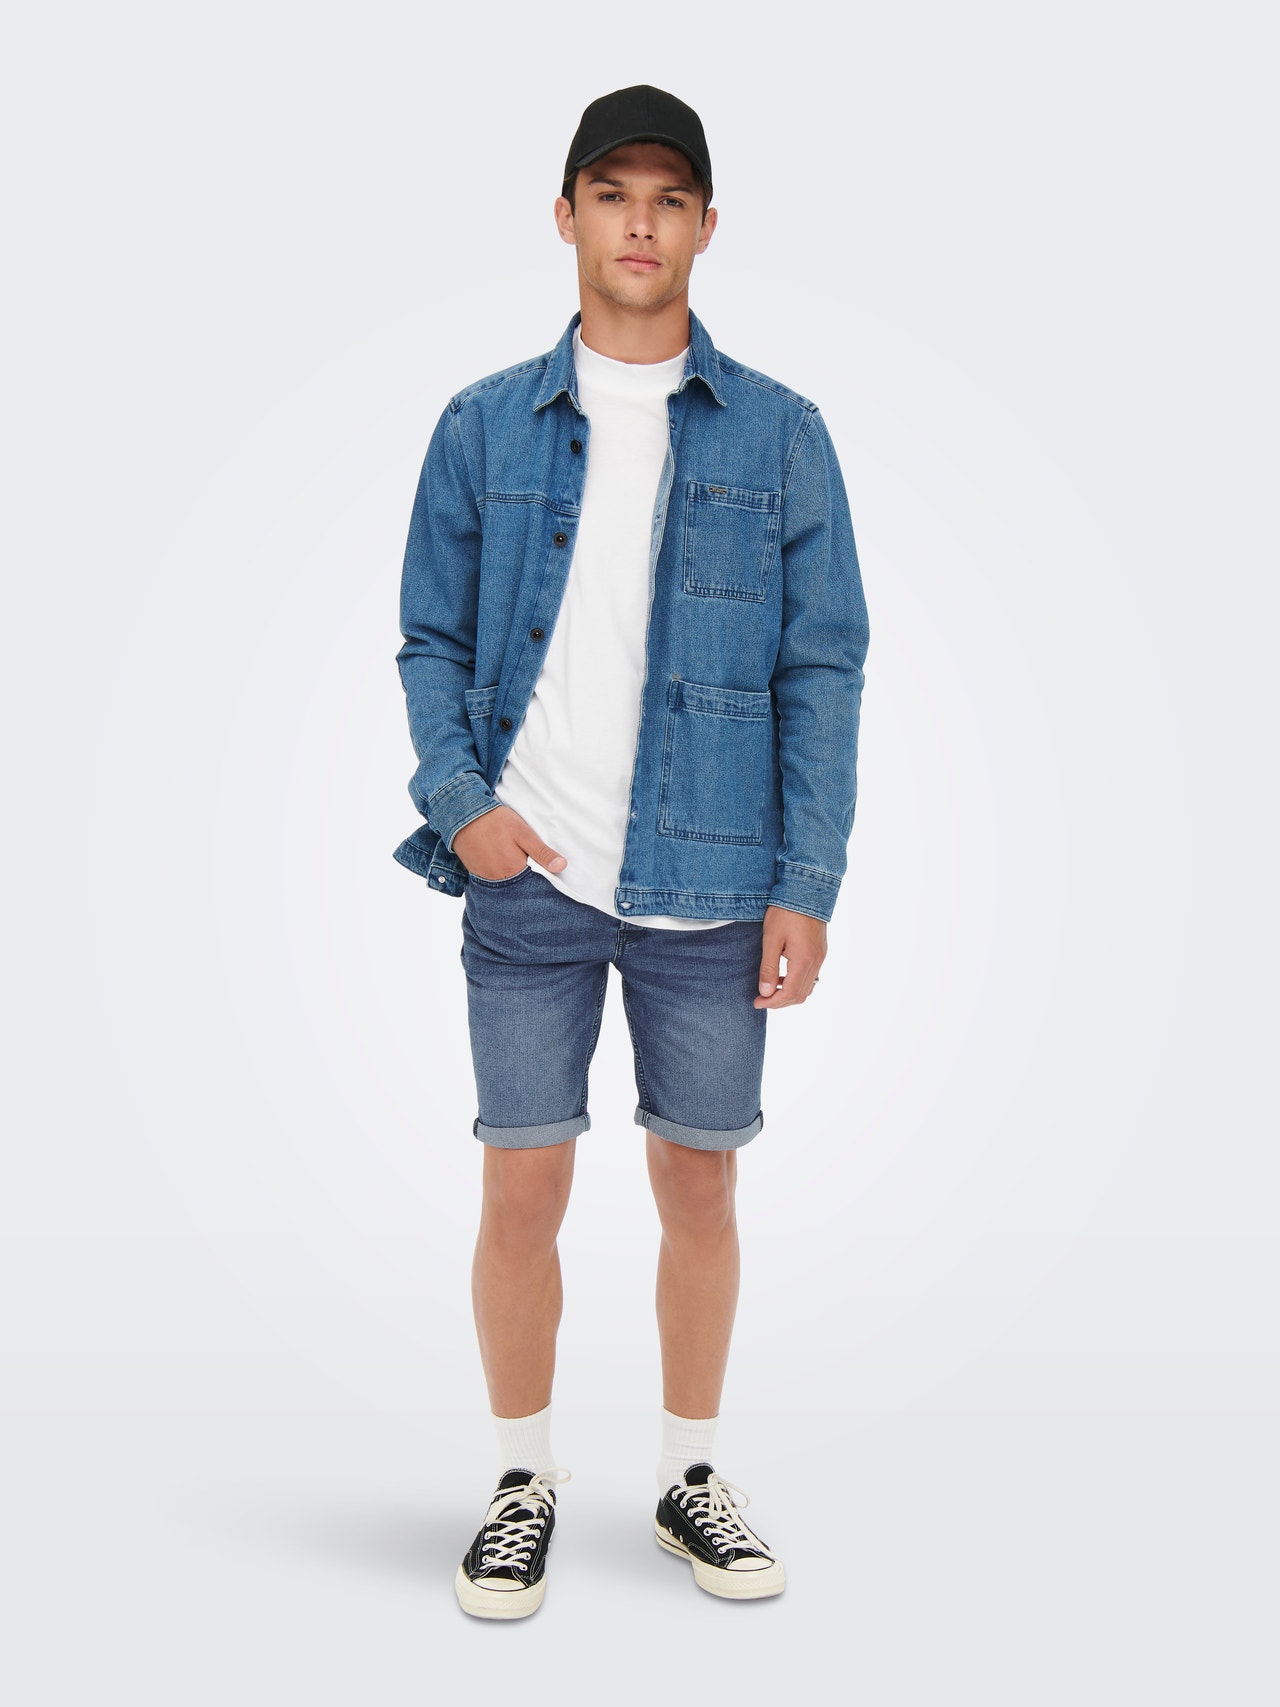 ONLY & SONS ONSPLY SHORTS BLUE PK 0754 -Blue Denim - 22020754